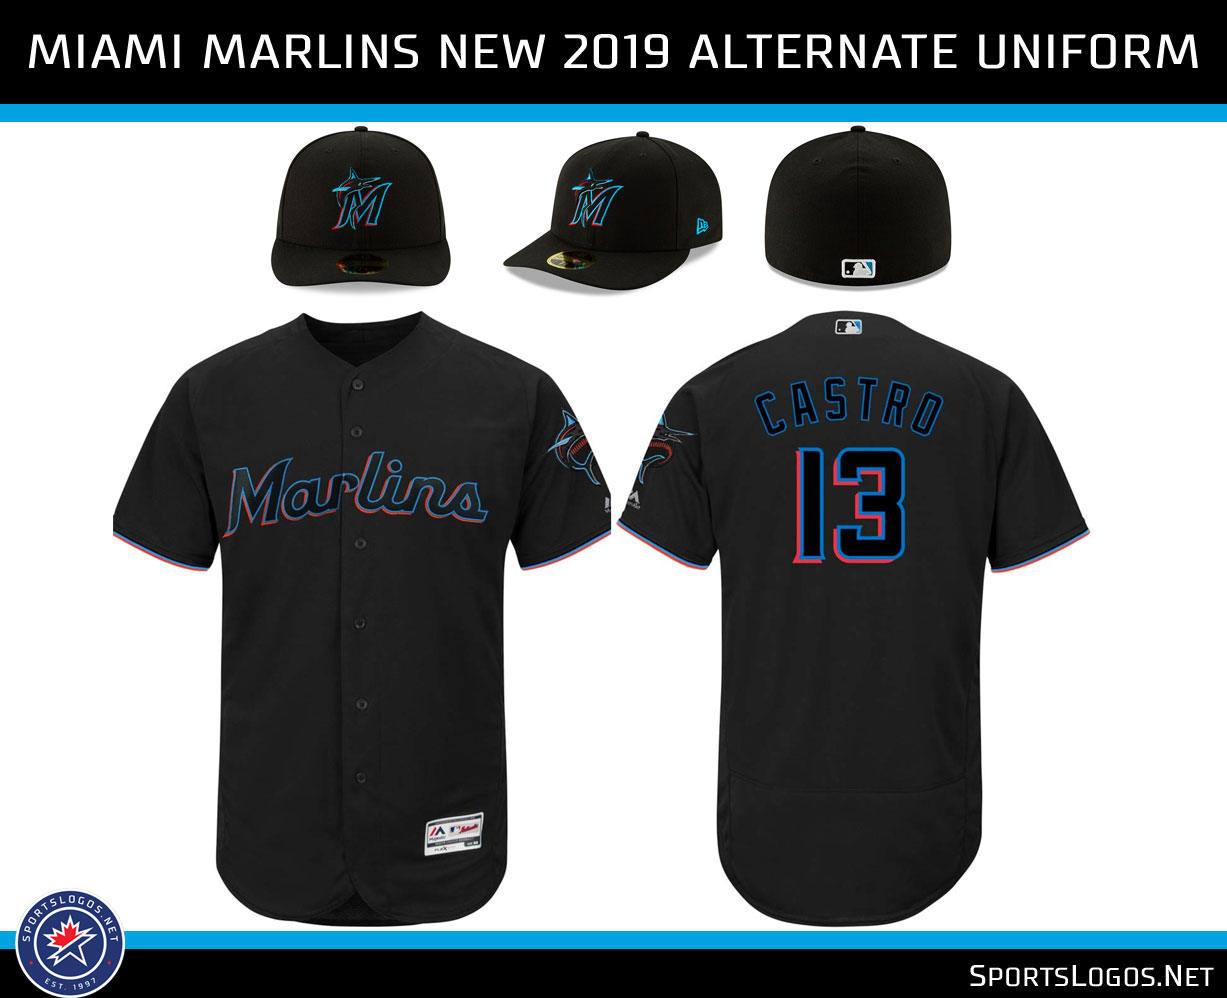 Our Colores Miami Marlins Unveil New Logos, Uniforms for 2019